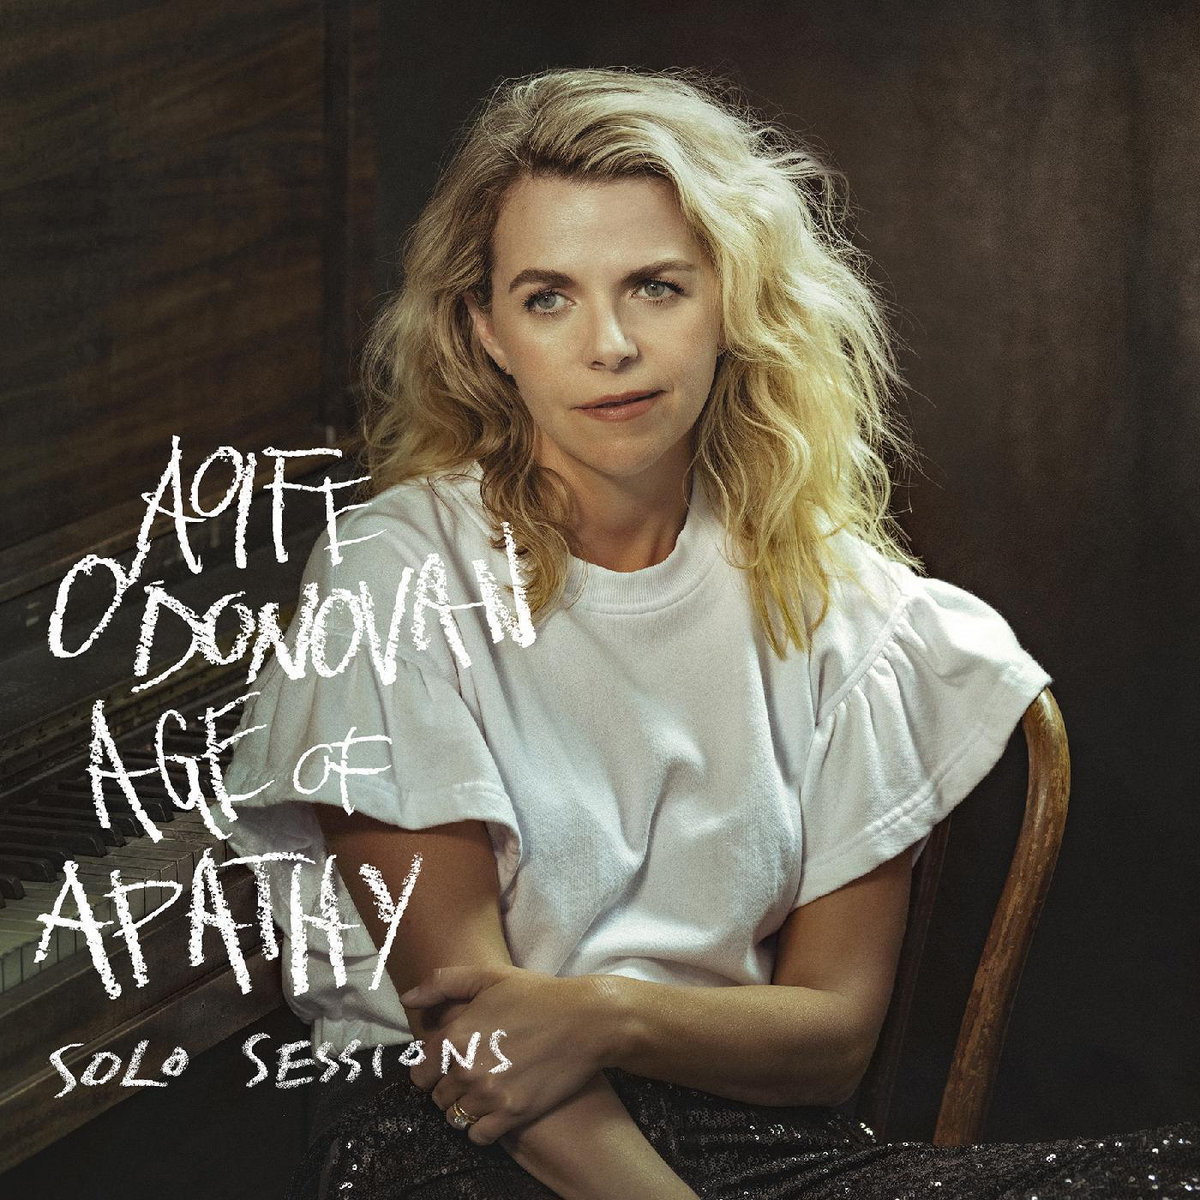 Aoife O’Donovan – Age of Apathy Solo Sessions